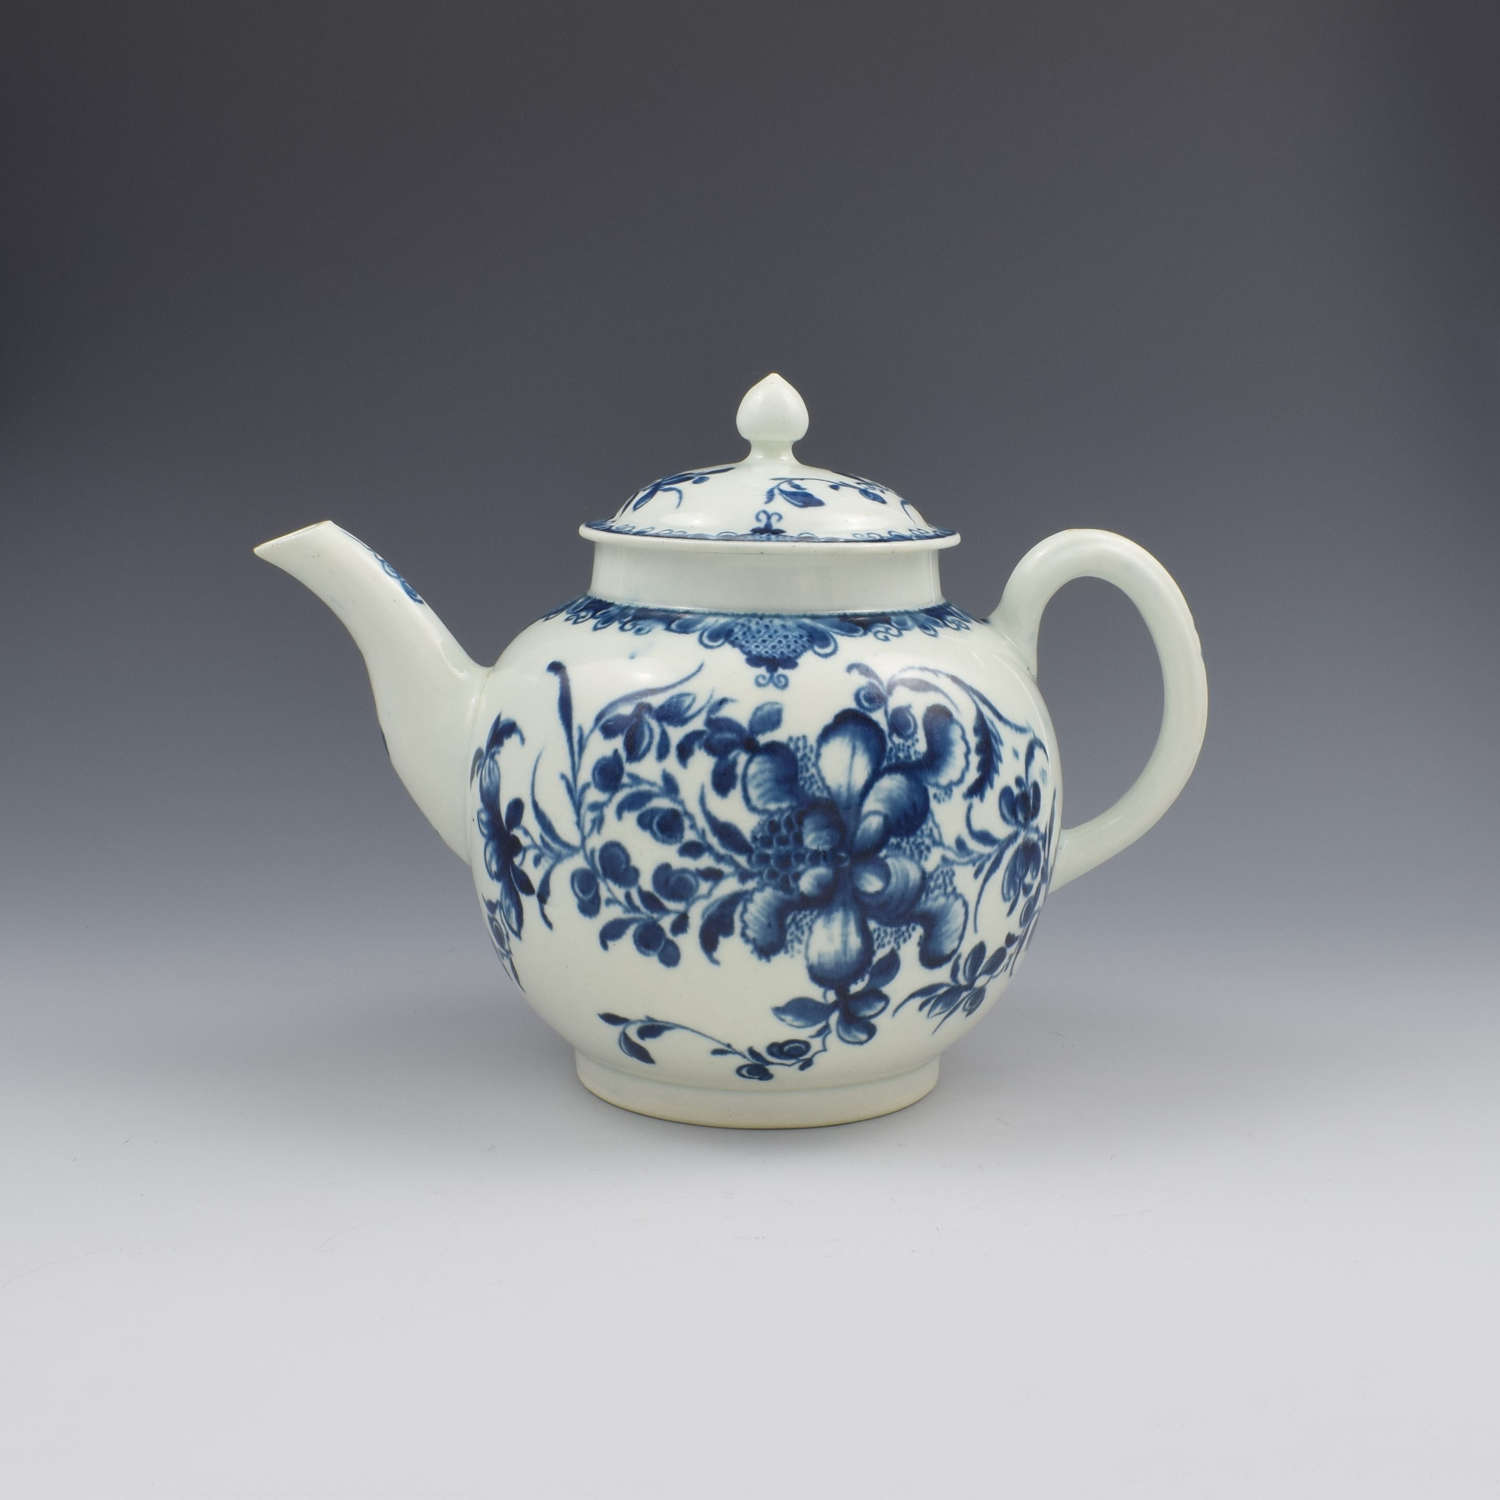 Large First Period Worcester Porcelain Mansfield Pattern Teapot c.1775